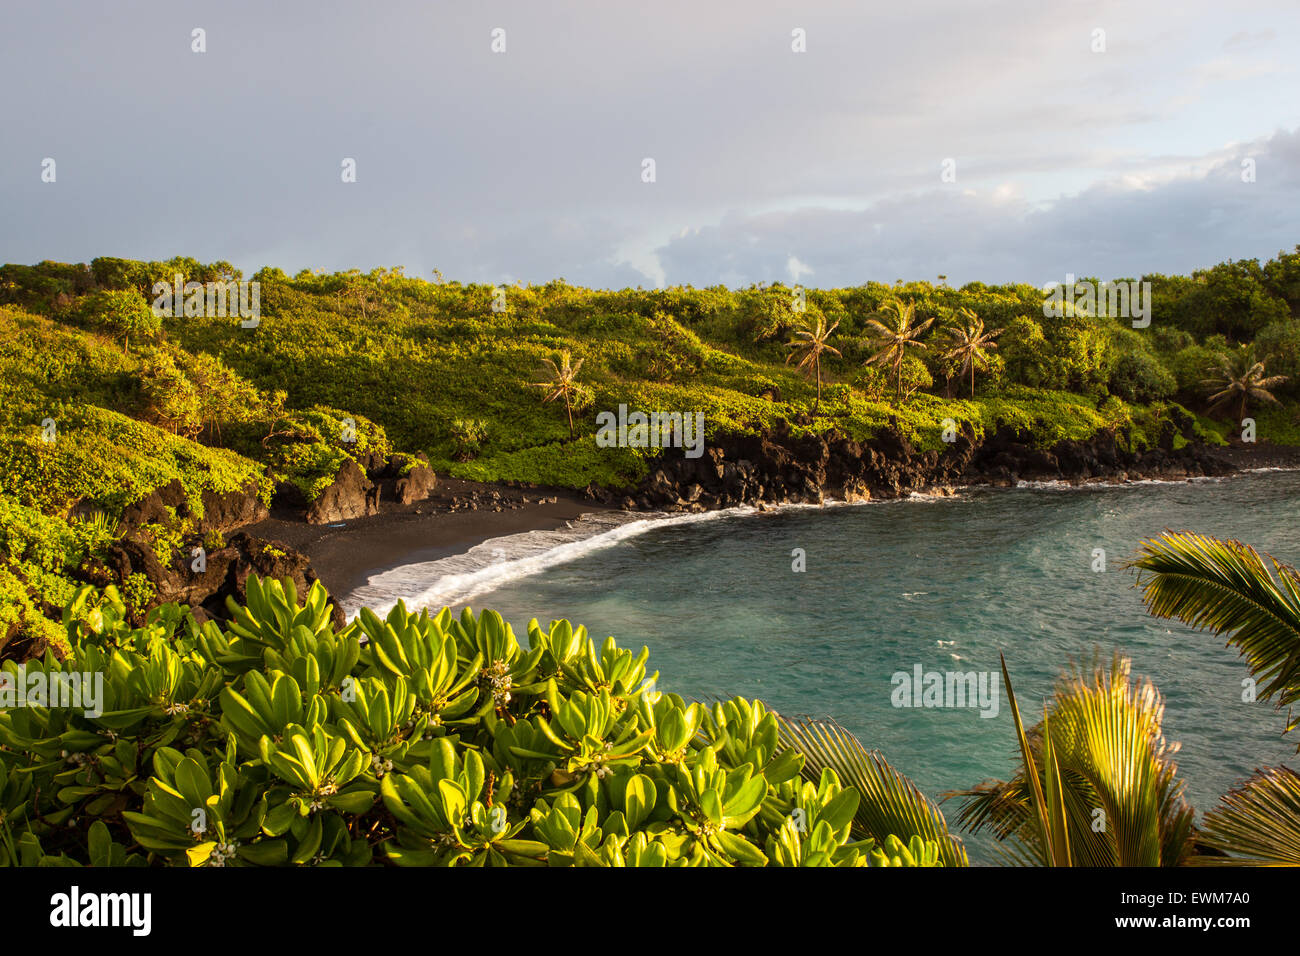 A view of the black sand beach at Wai'anapanapa State Park in Maui, Hawaii. Stock Photo